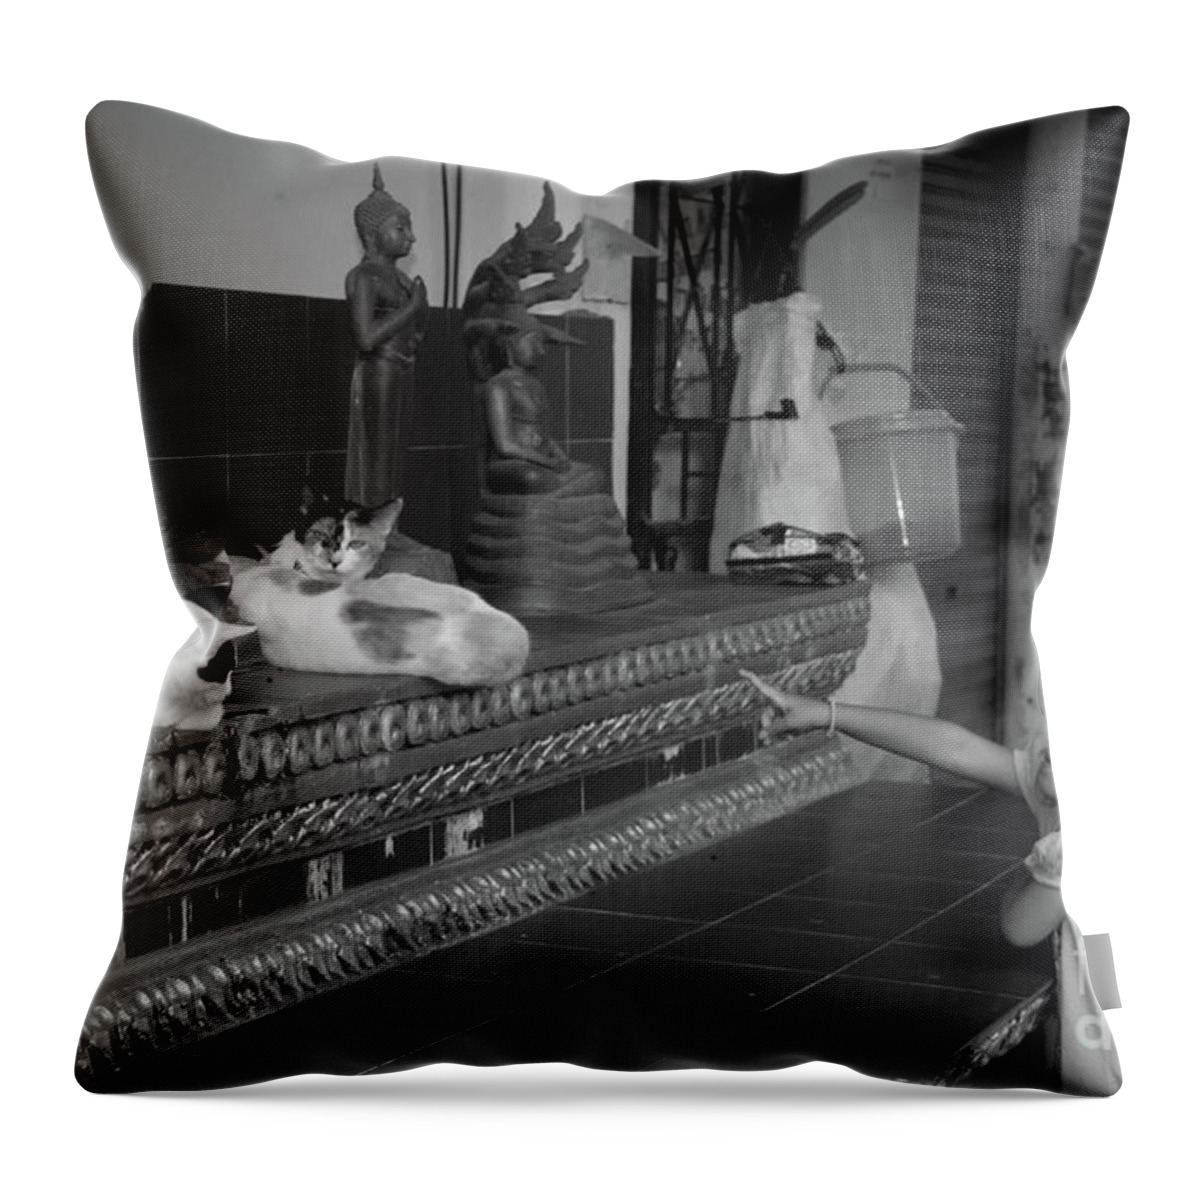 Temple's Cats Throw Pillow featuring the photograph The Little Girl And The Temple's Cats by Michelle Meenawong